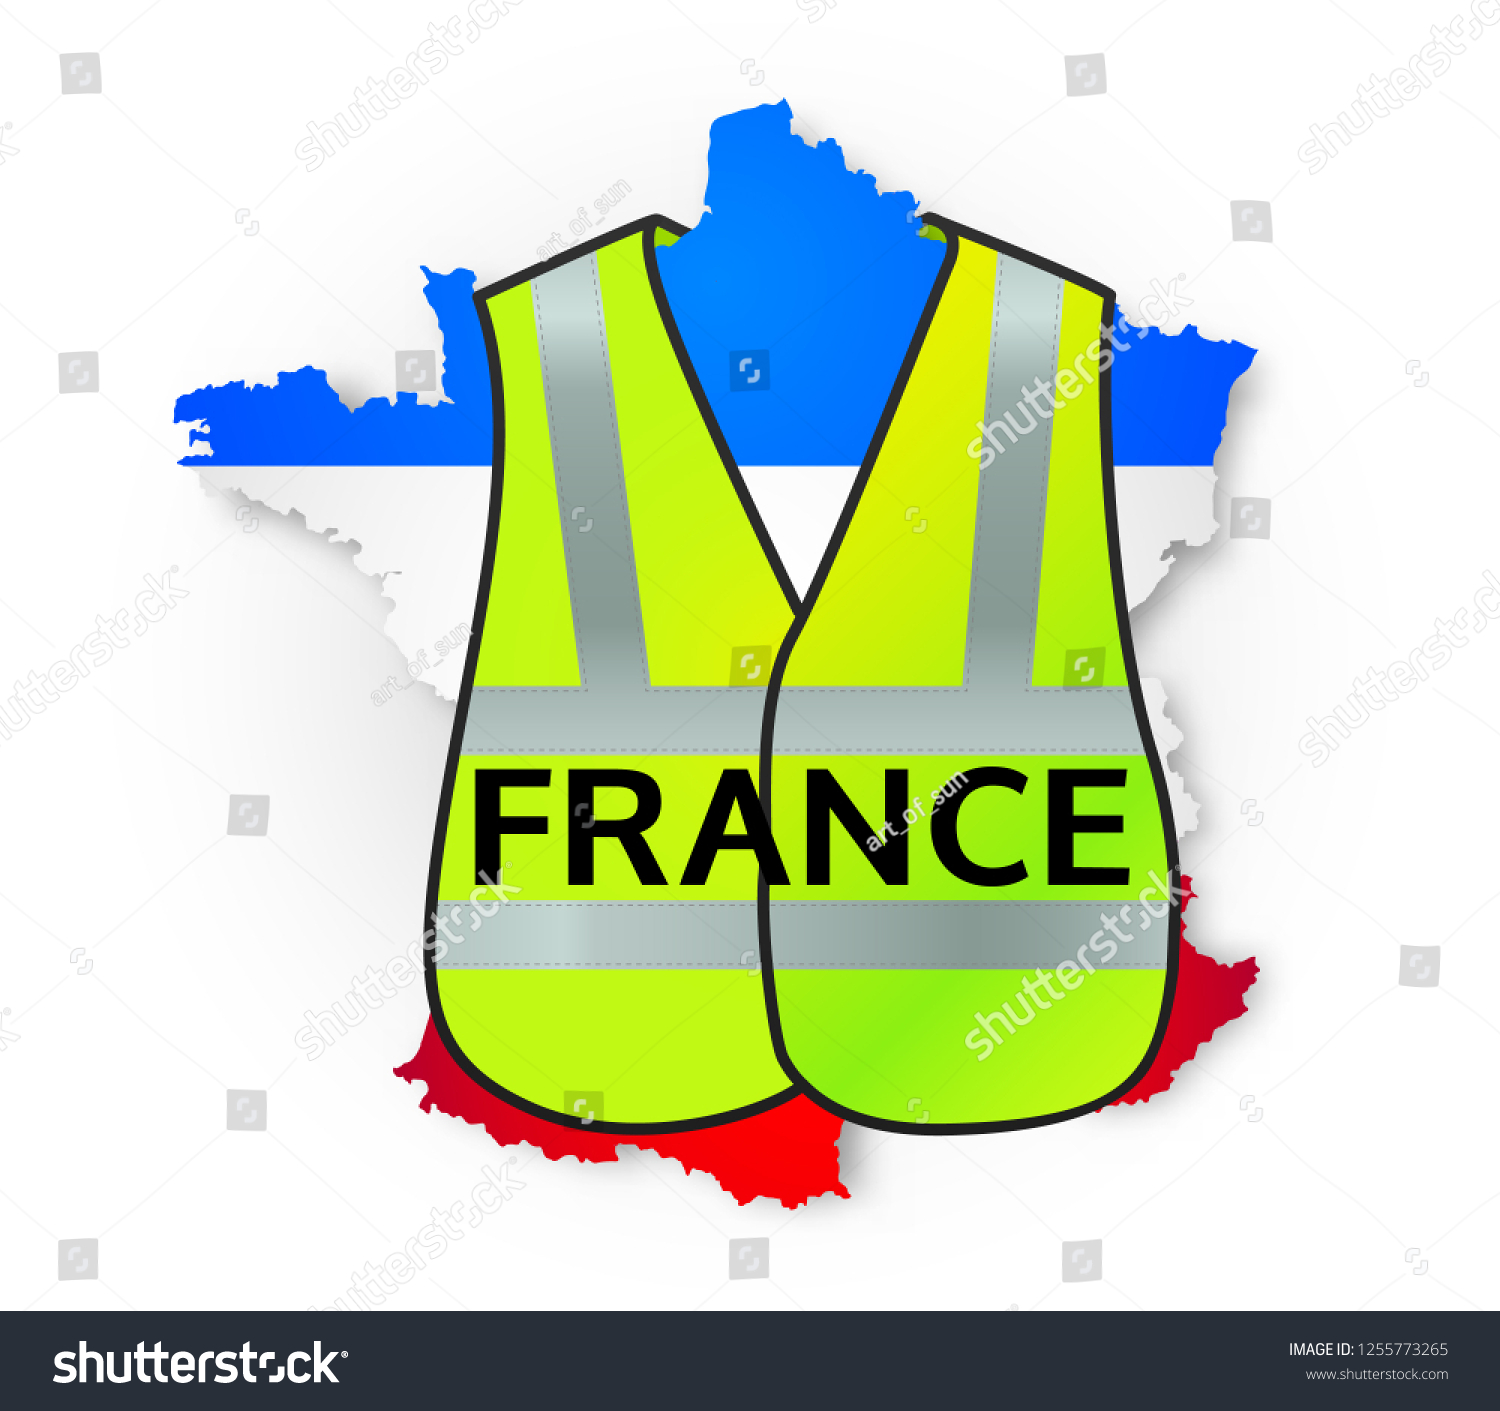 SVG of France map in national flag colors with yellow jacket on it, symbol of manifestations svg